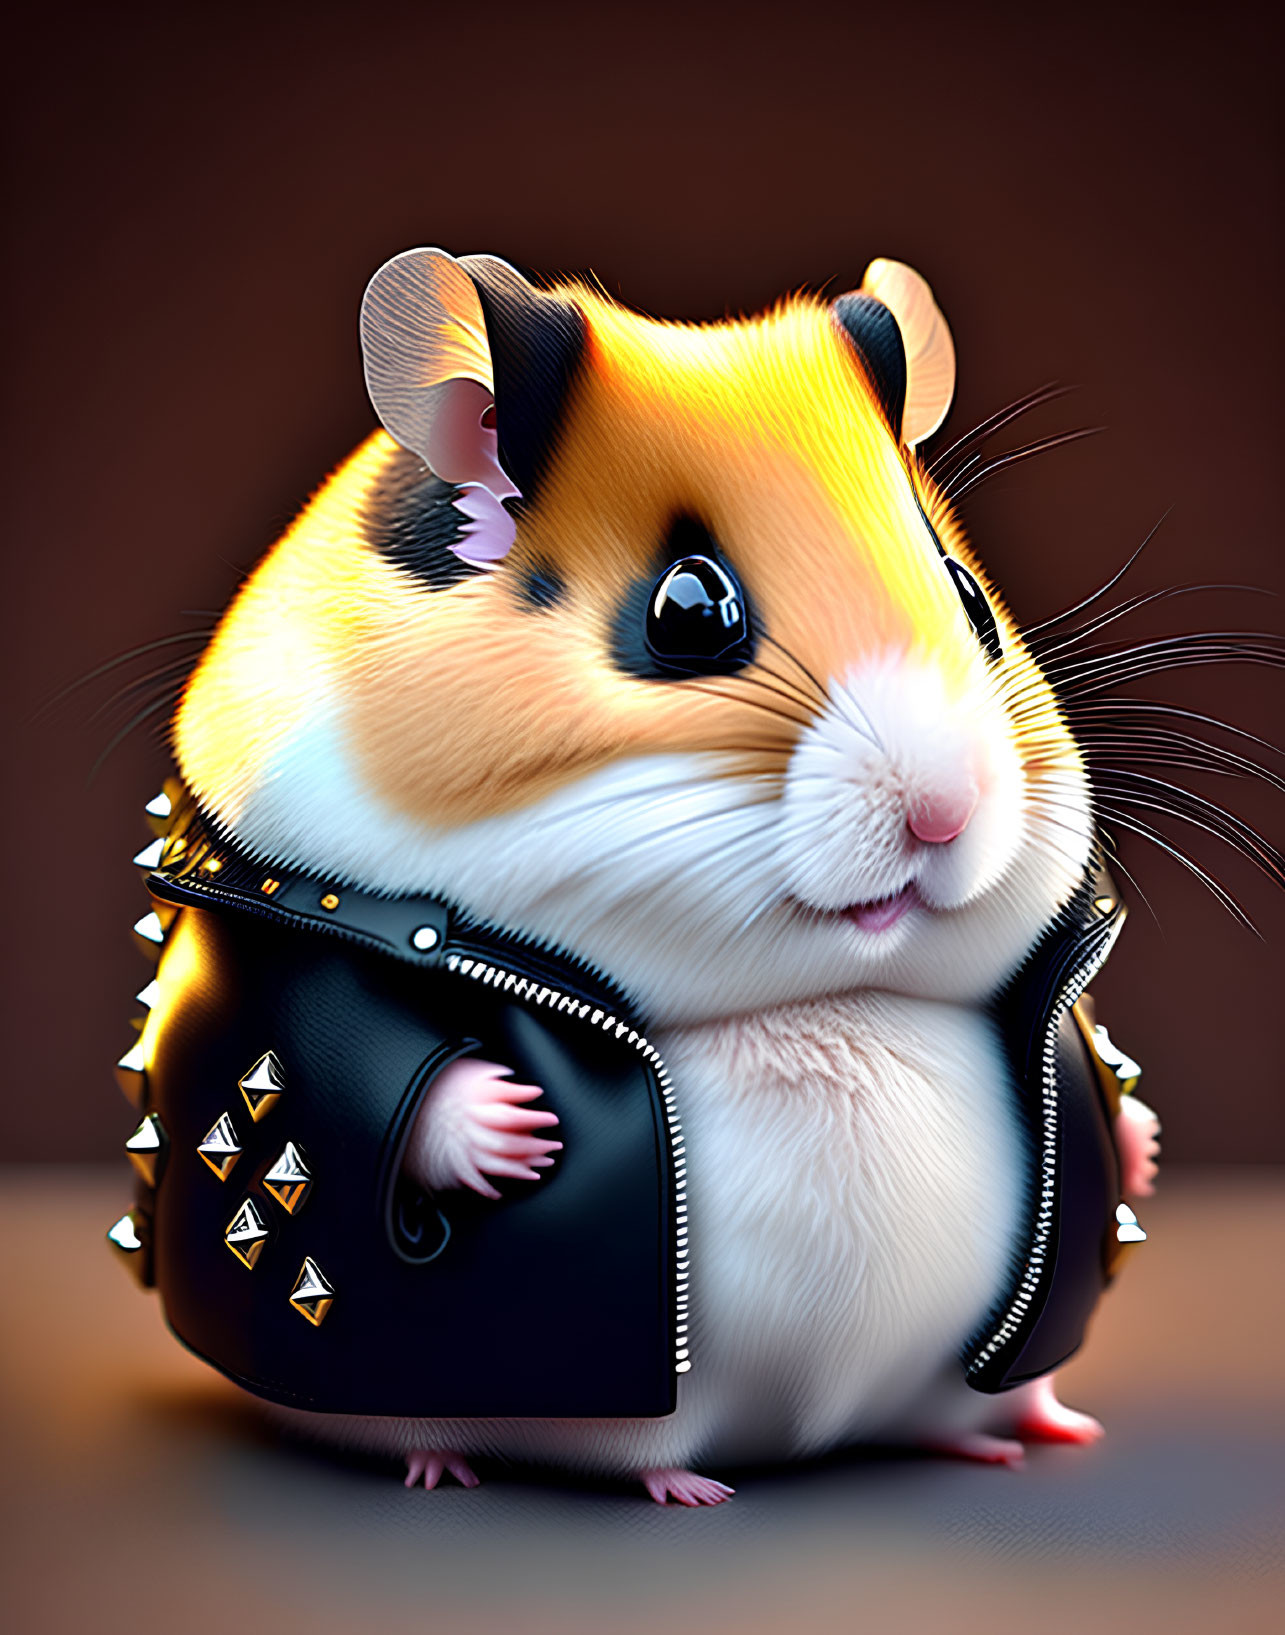 Cartoon hamster in spiked leather jacket on dark background